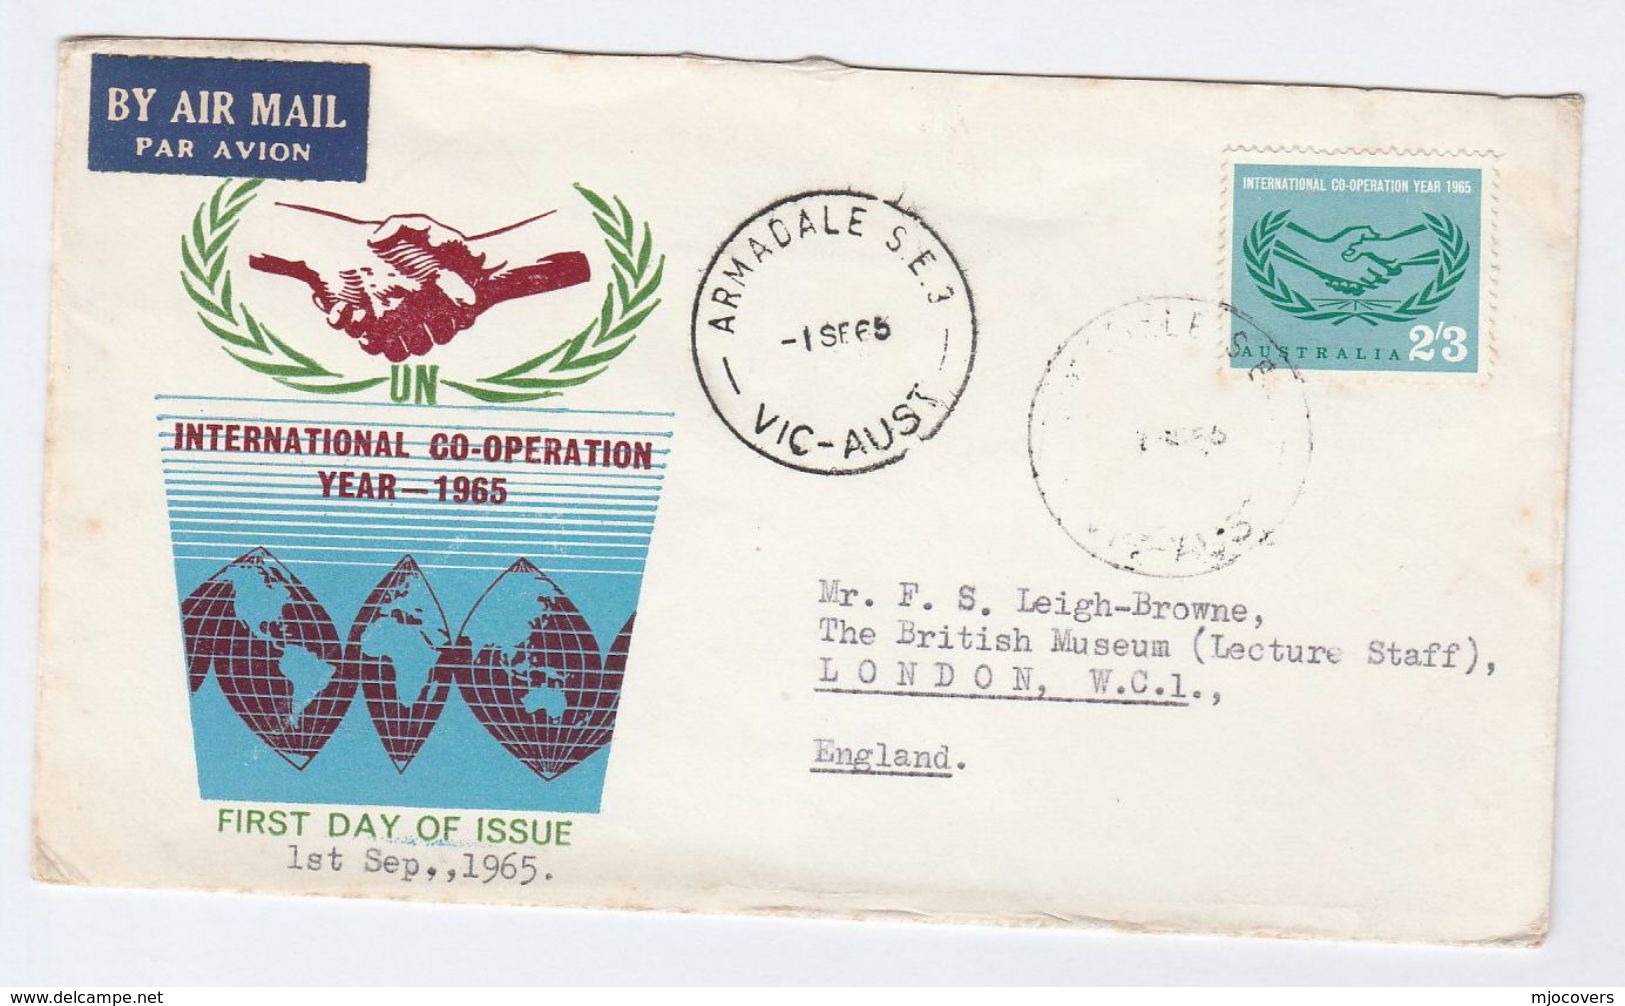 1965 Air Mail Armadale AUSTRALIA FDC 2/3 International Cooperation Year To GB  Un United Nations Airmail Label Cover - Premiers Jours (FDC)